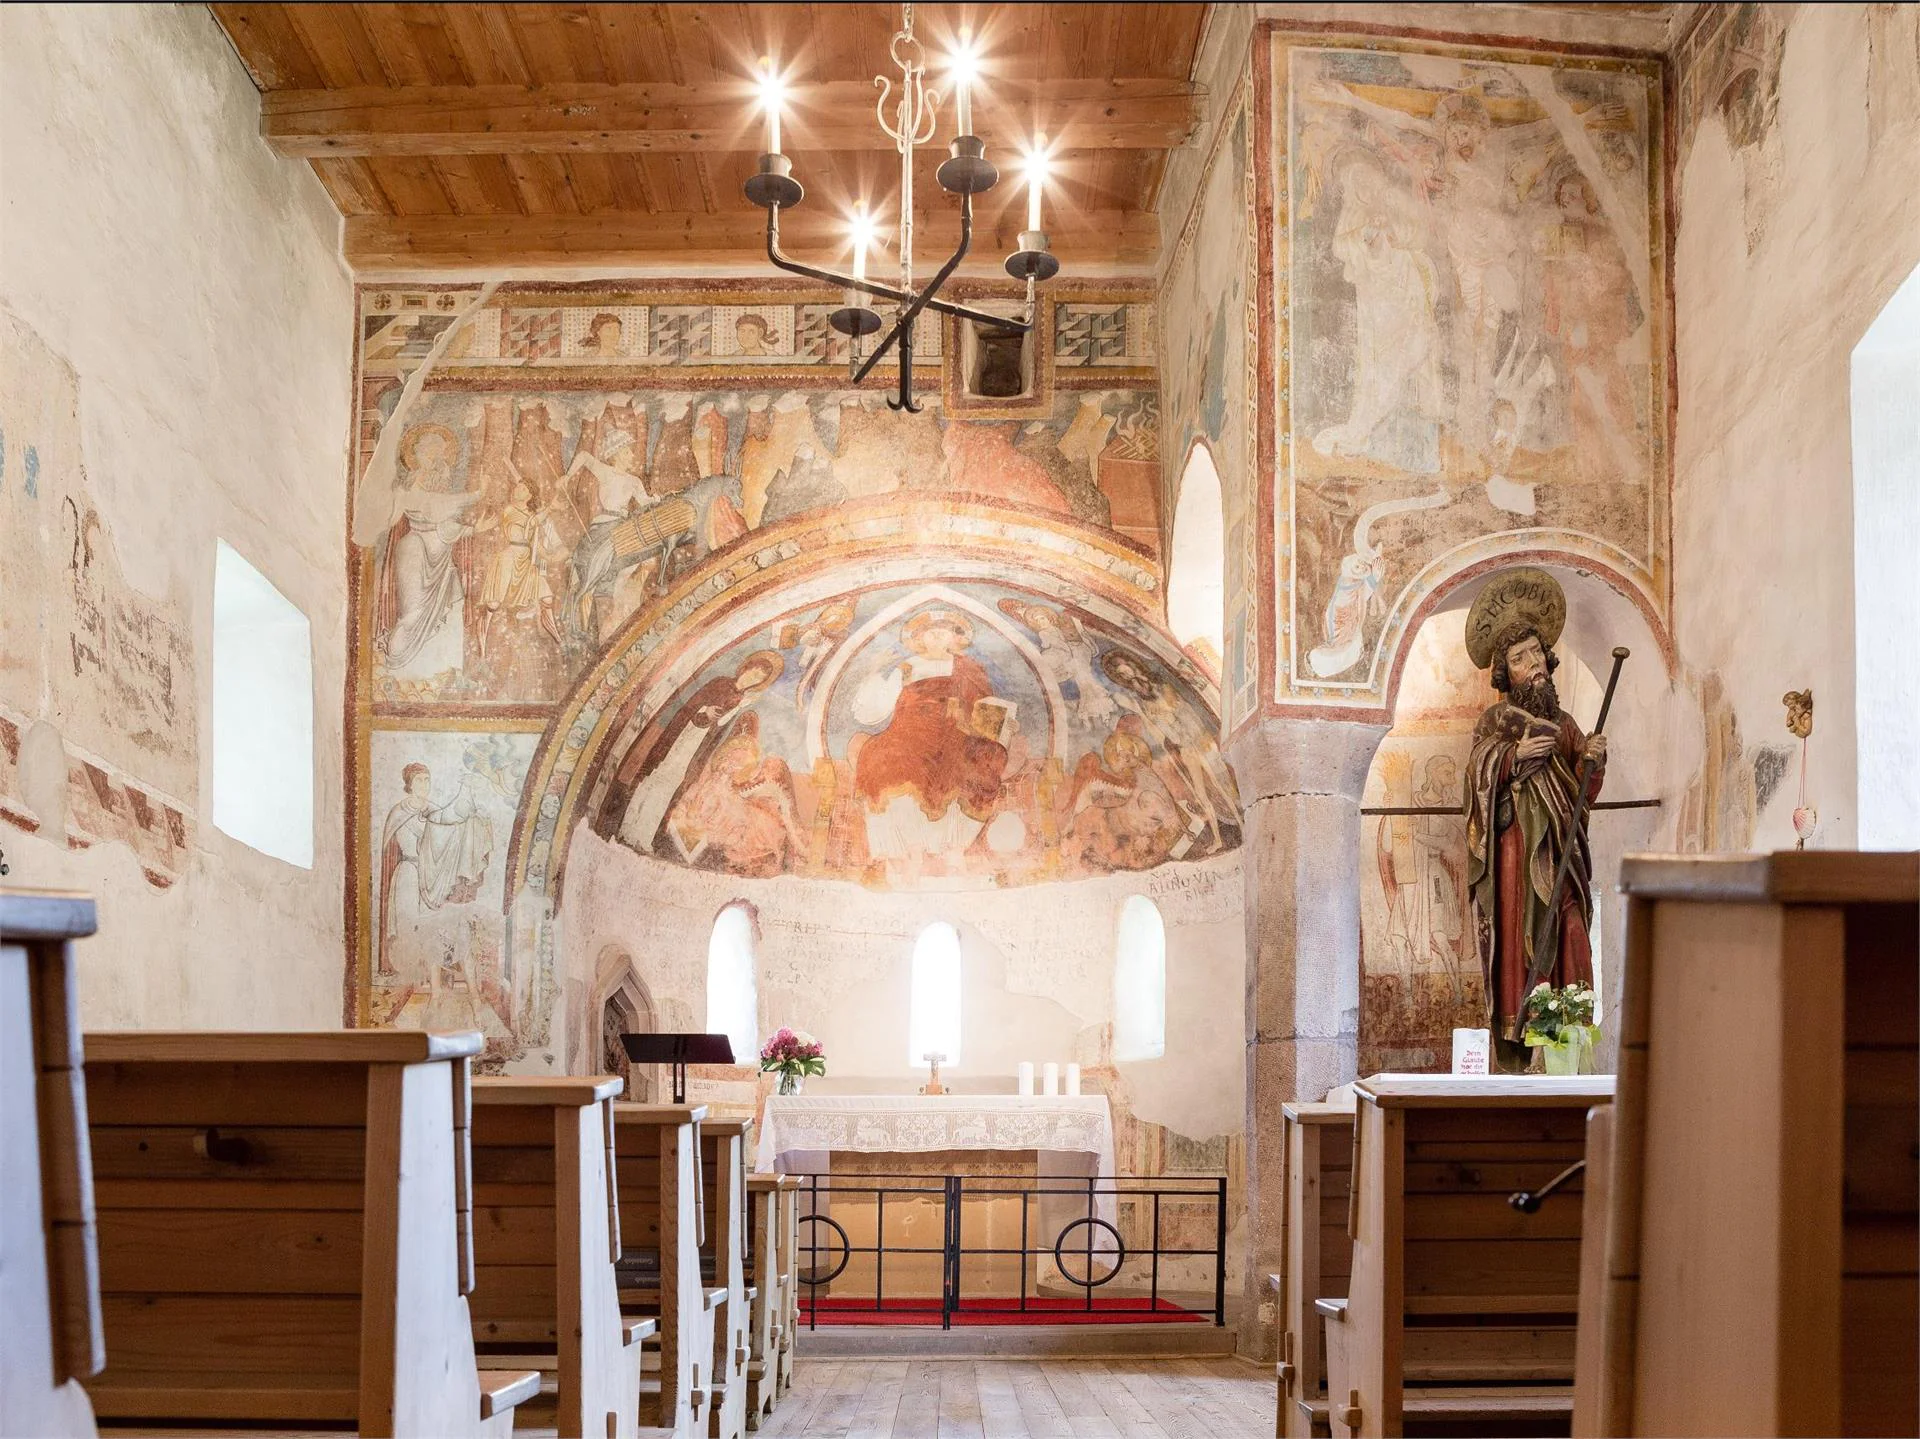 From Prissiano to the St. Jakob's Church in Grissian/Grissiano Tisens/Tesimo 2 suedtirol.info